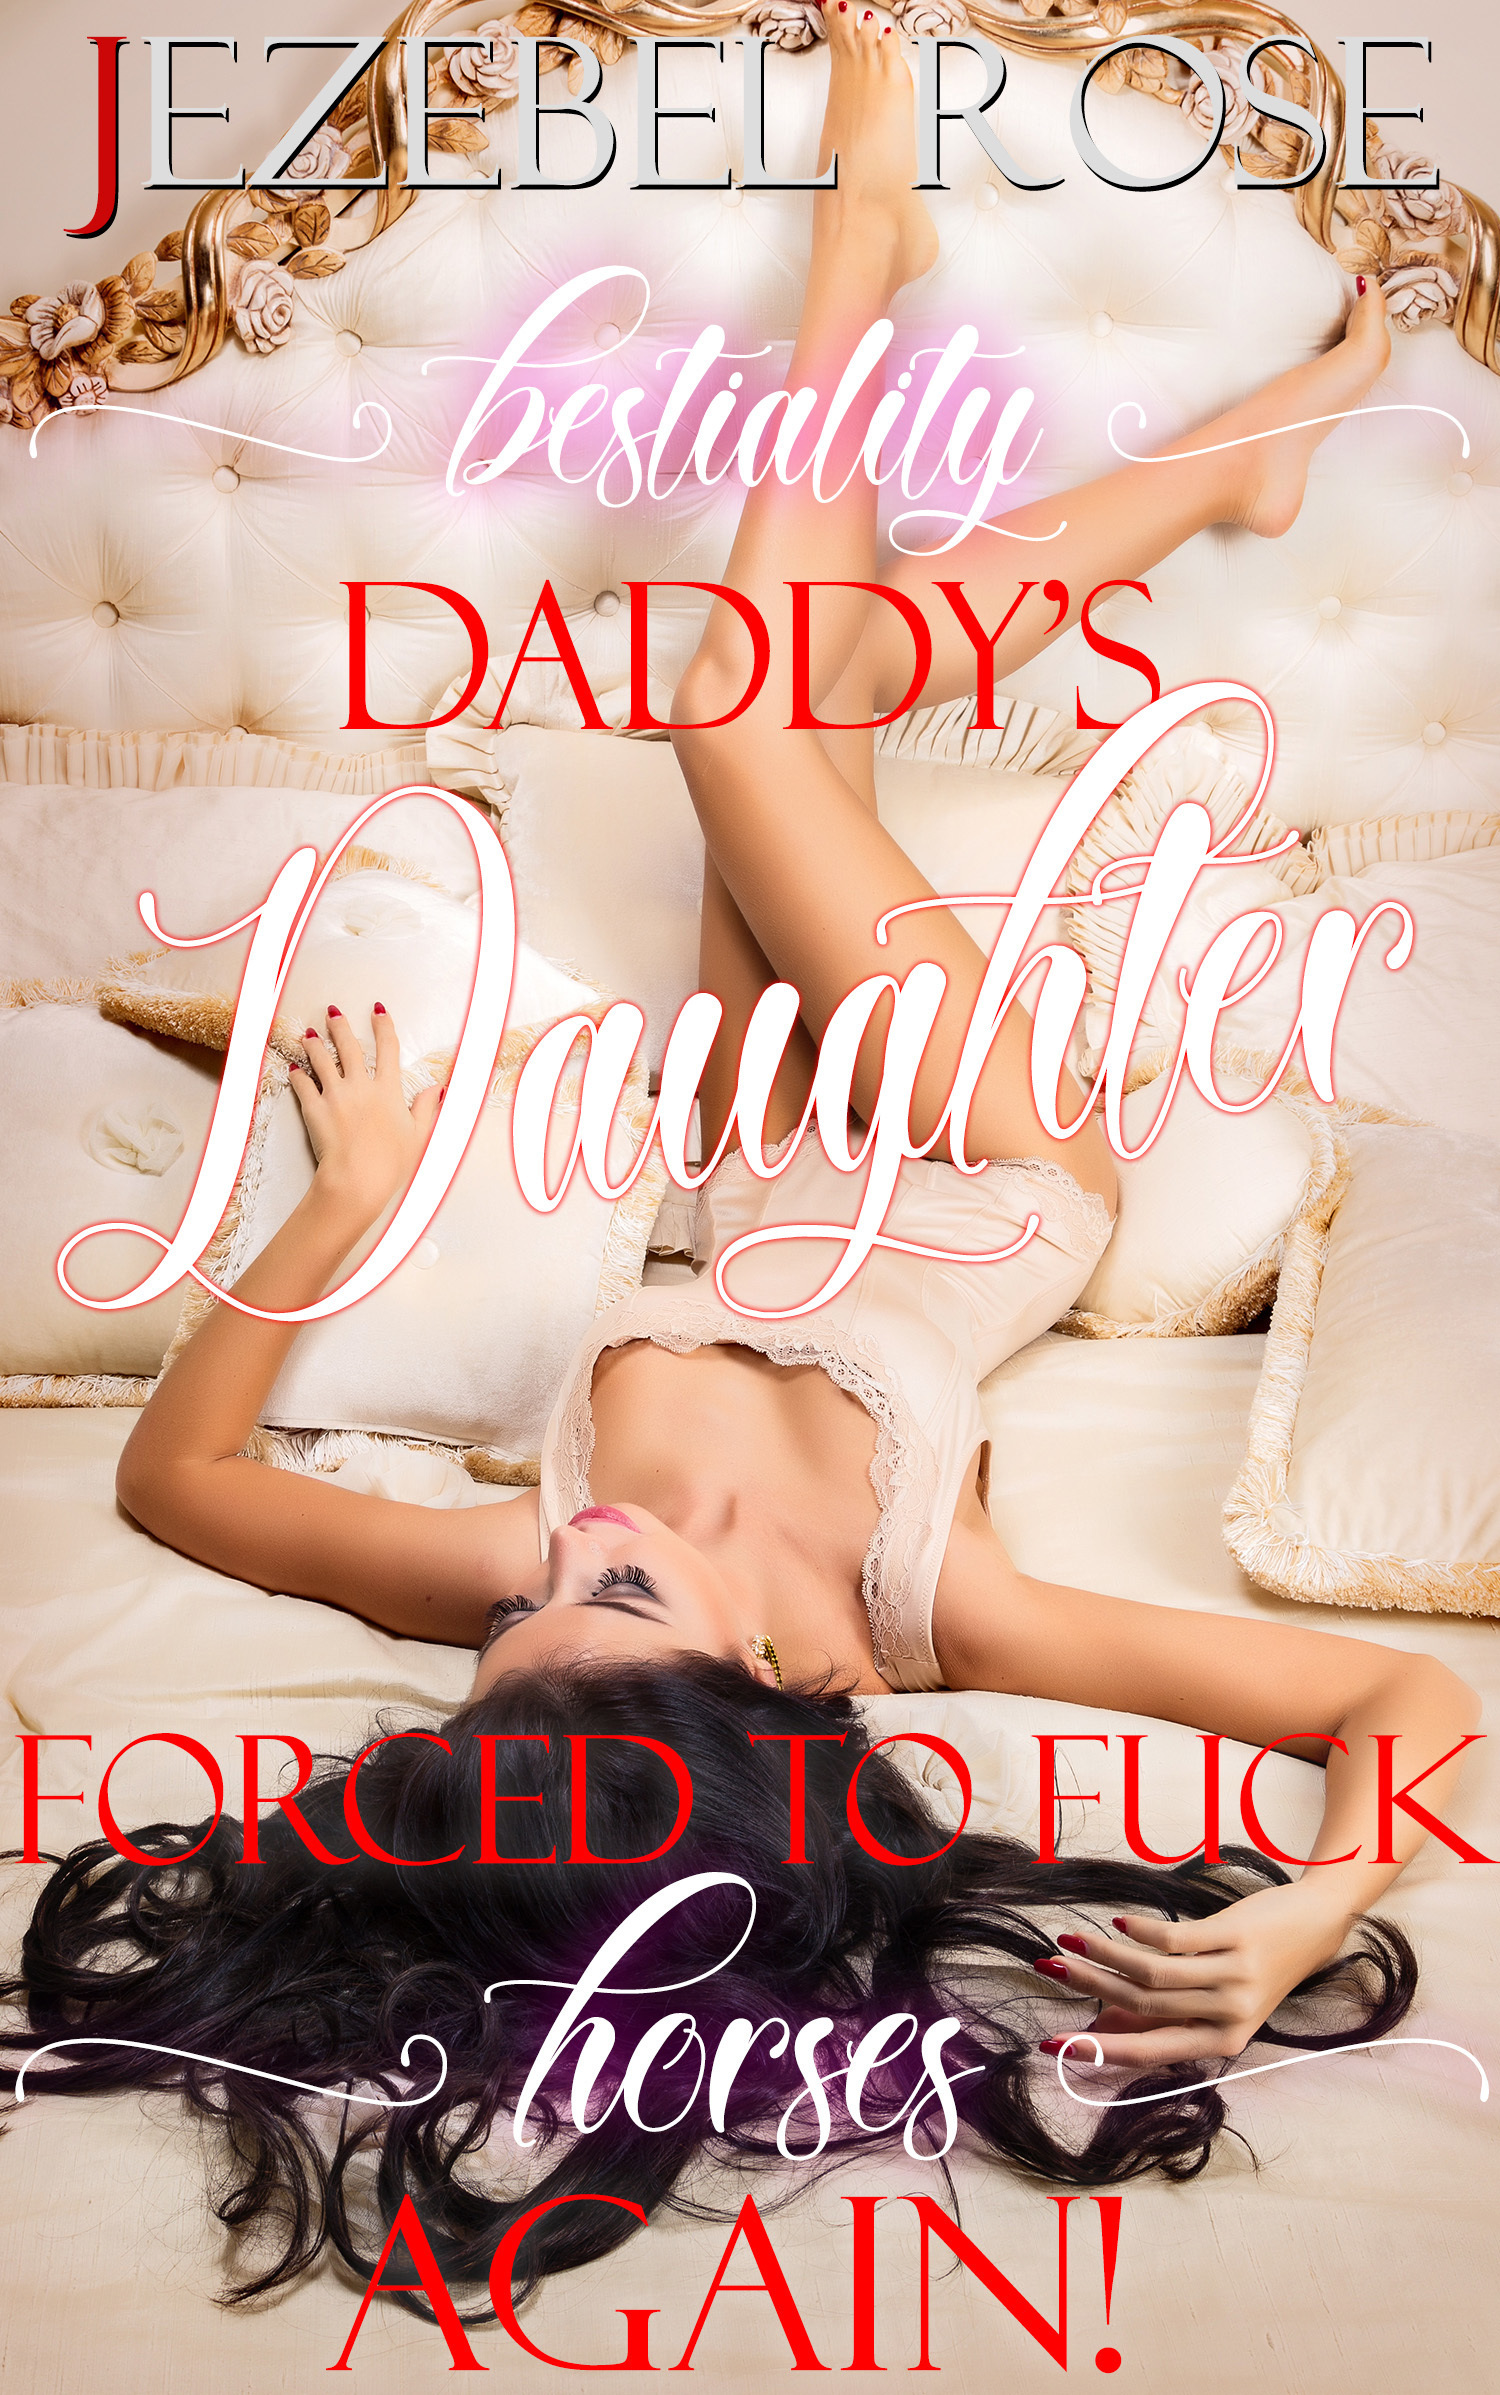 daddy force fucking daughter